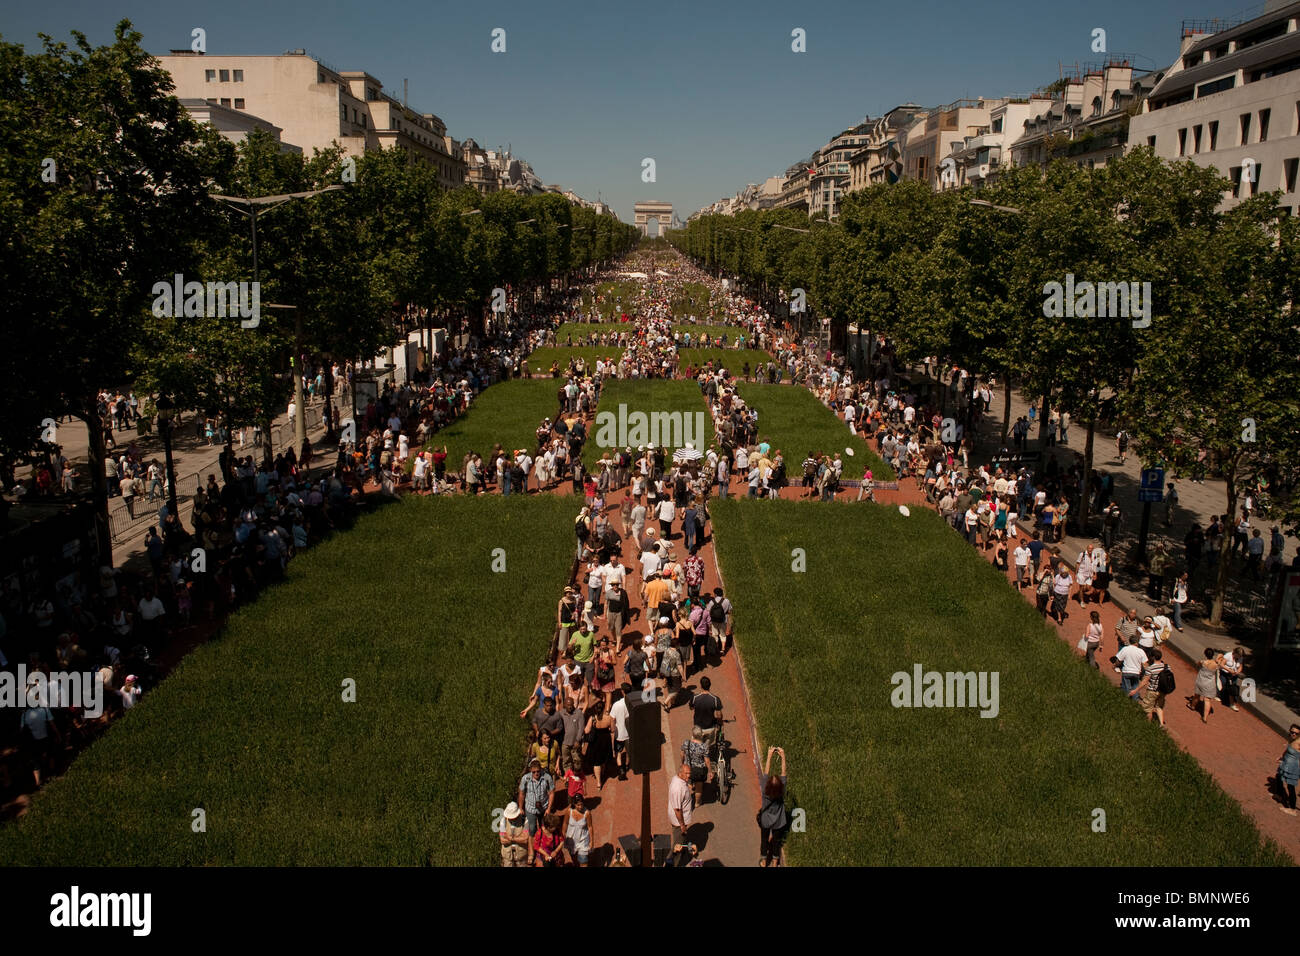 Crowds visit the Champs Elysees in Paris, Agriculturalists put plants there as a demonstration of their profession - Photograph Stock Photo